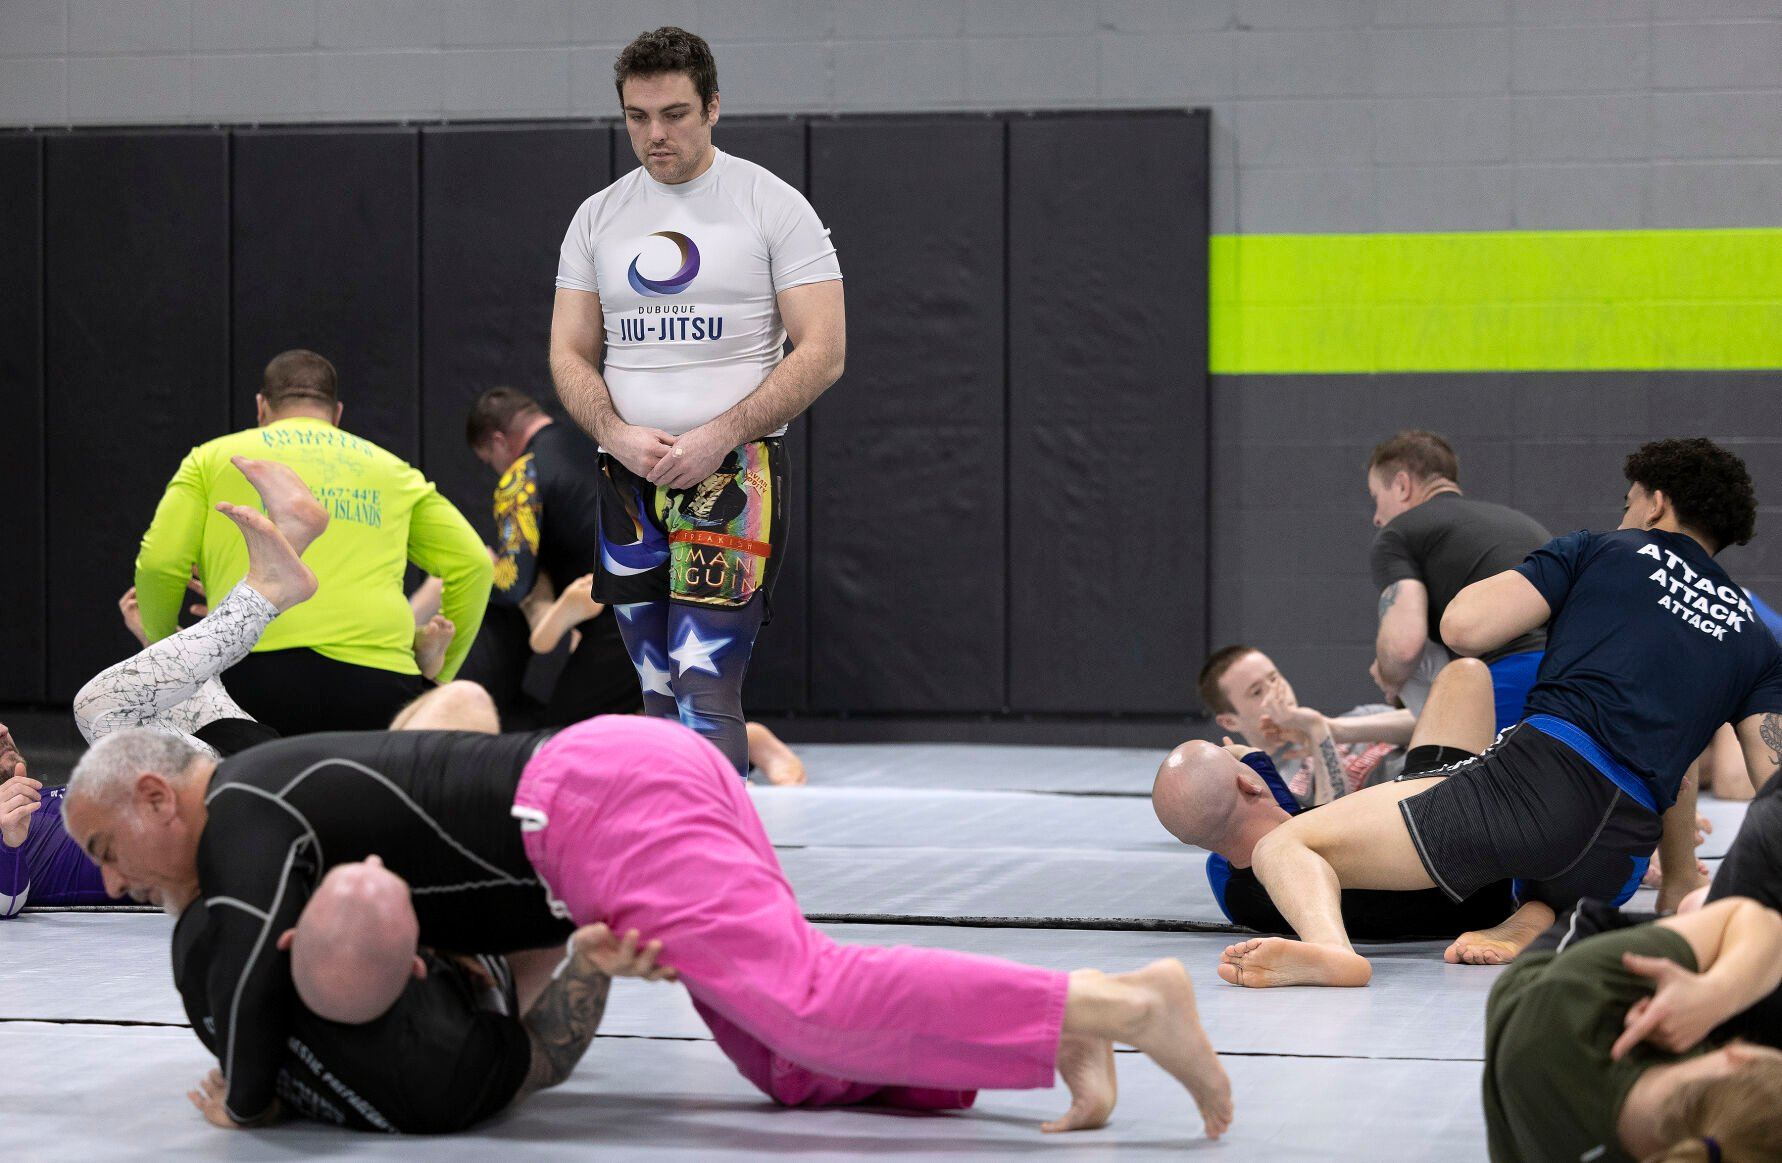 Dubuque Brazilian Jiu-Jitsu owner Willie Doyle teaches a class at Volv Fitness in Dubuque on Monday, March 27, 2023.    PHOTO CREDIT: Gassman